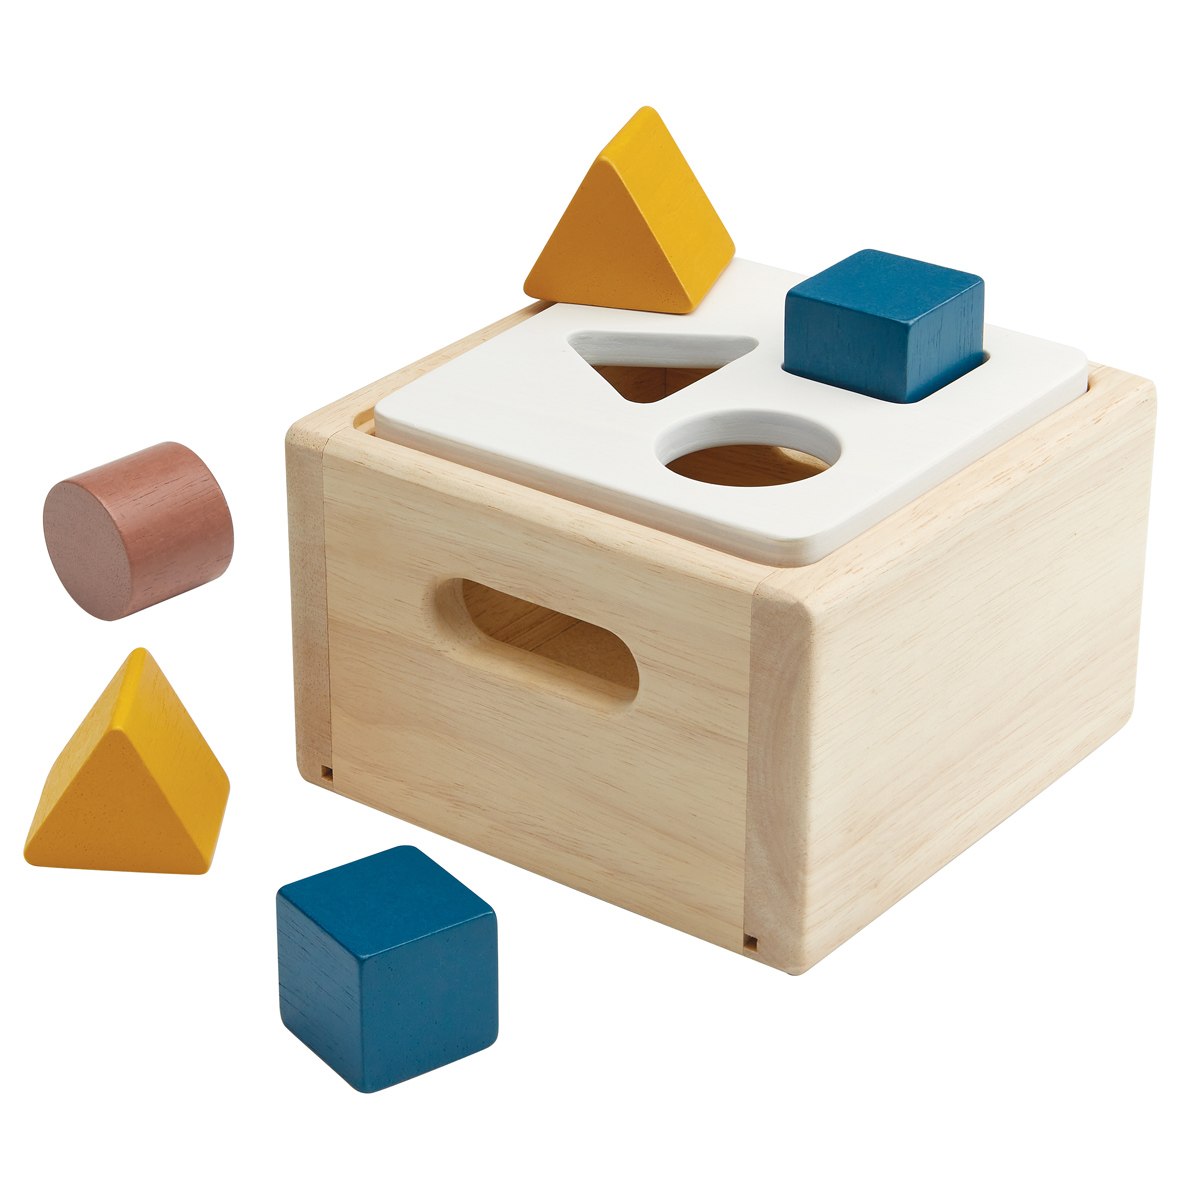 Geo Junzo Wooden Shape Sorting Box Toddler Toy – Earth, 50% OFF